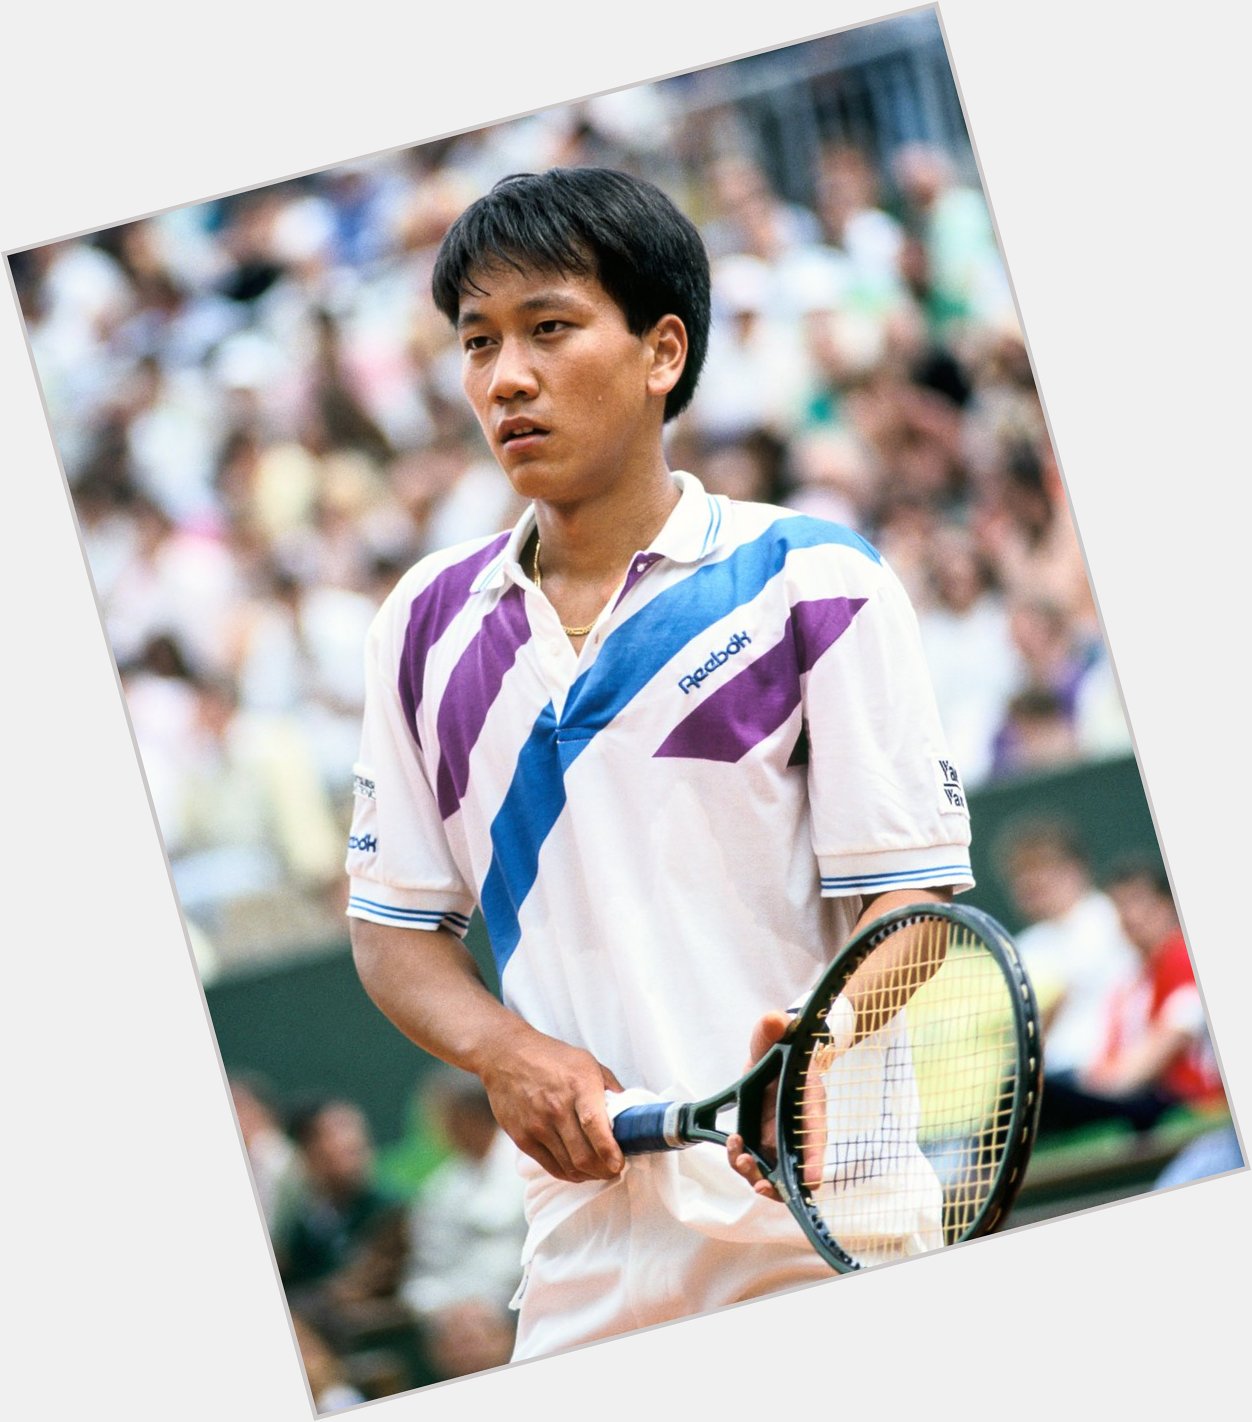  Our youngest ever men\s singles champion turns  today! 

Happy birthday, Michael Chang 